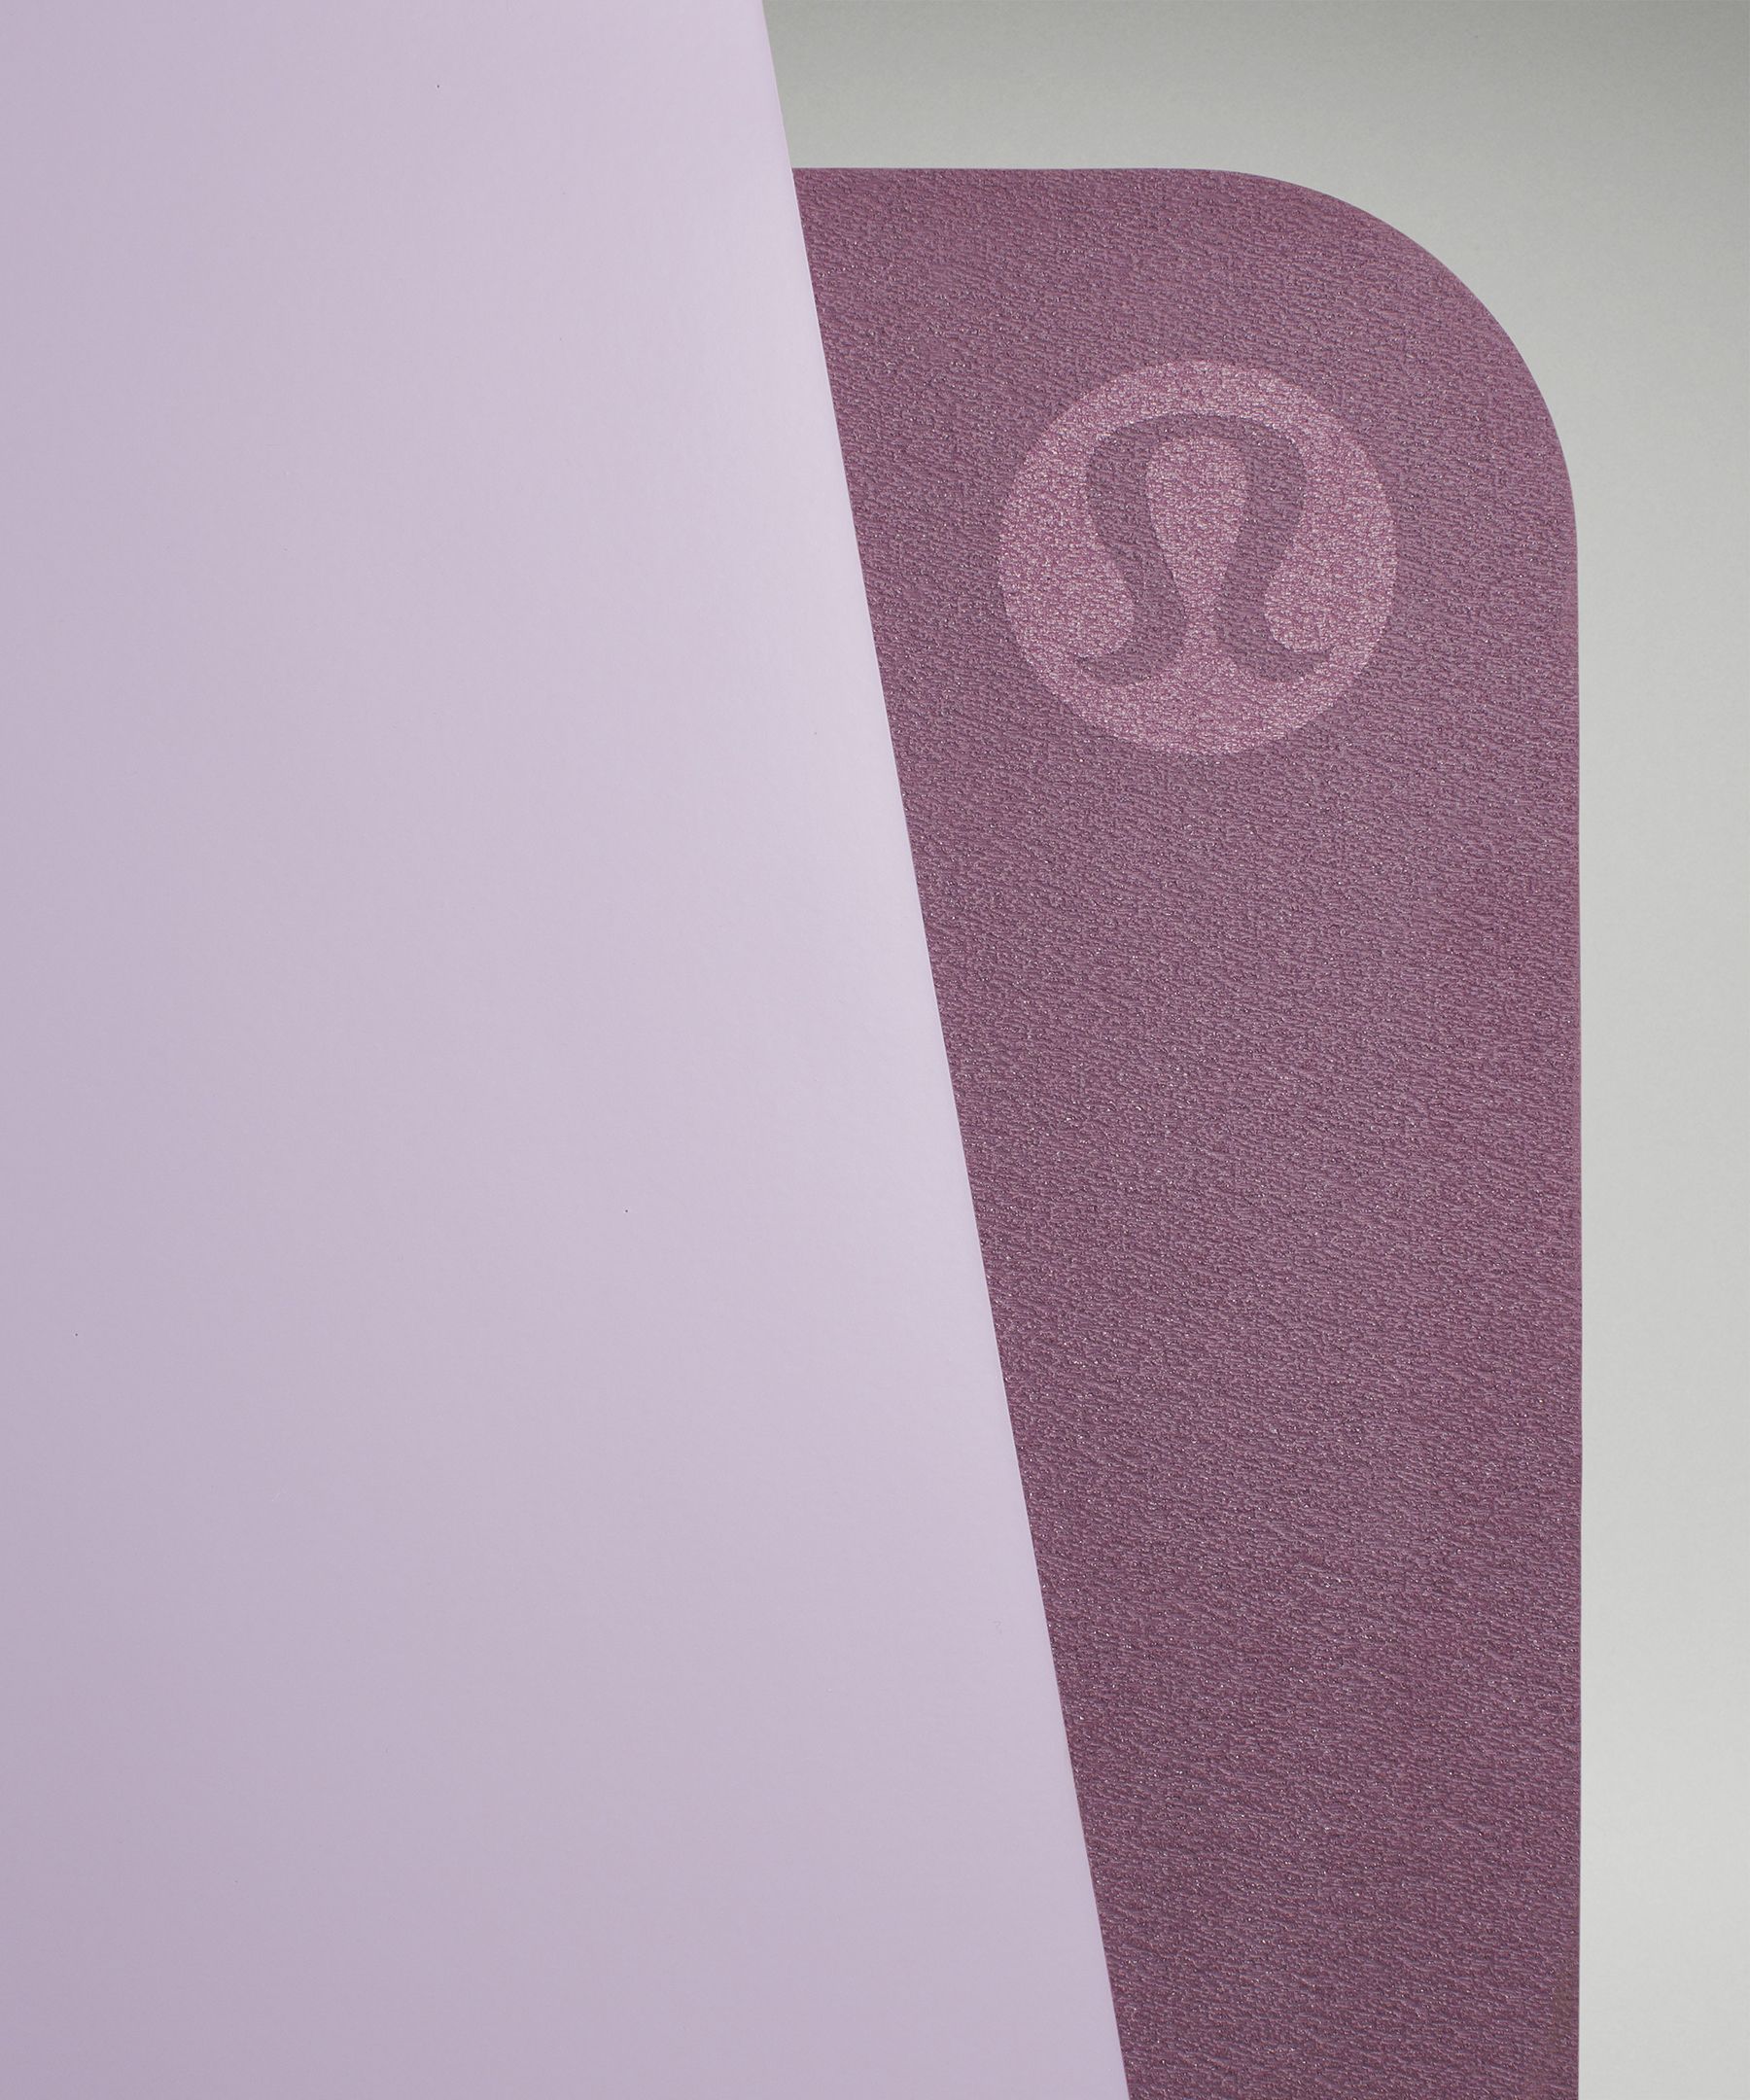 NWT Lululemon Take Form Yoga Mat 5mm Made With FSC-Certified Rubber Pink  Marble